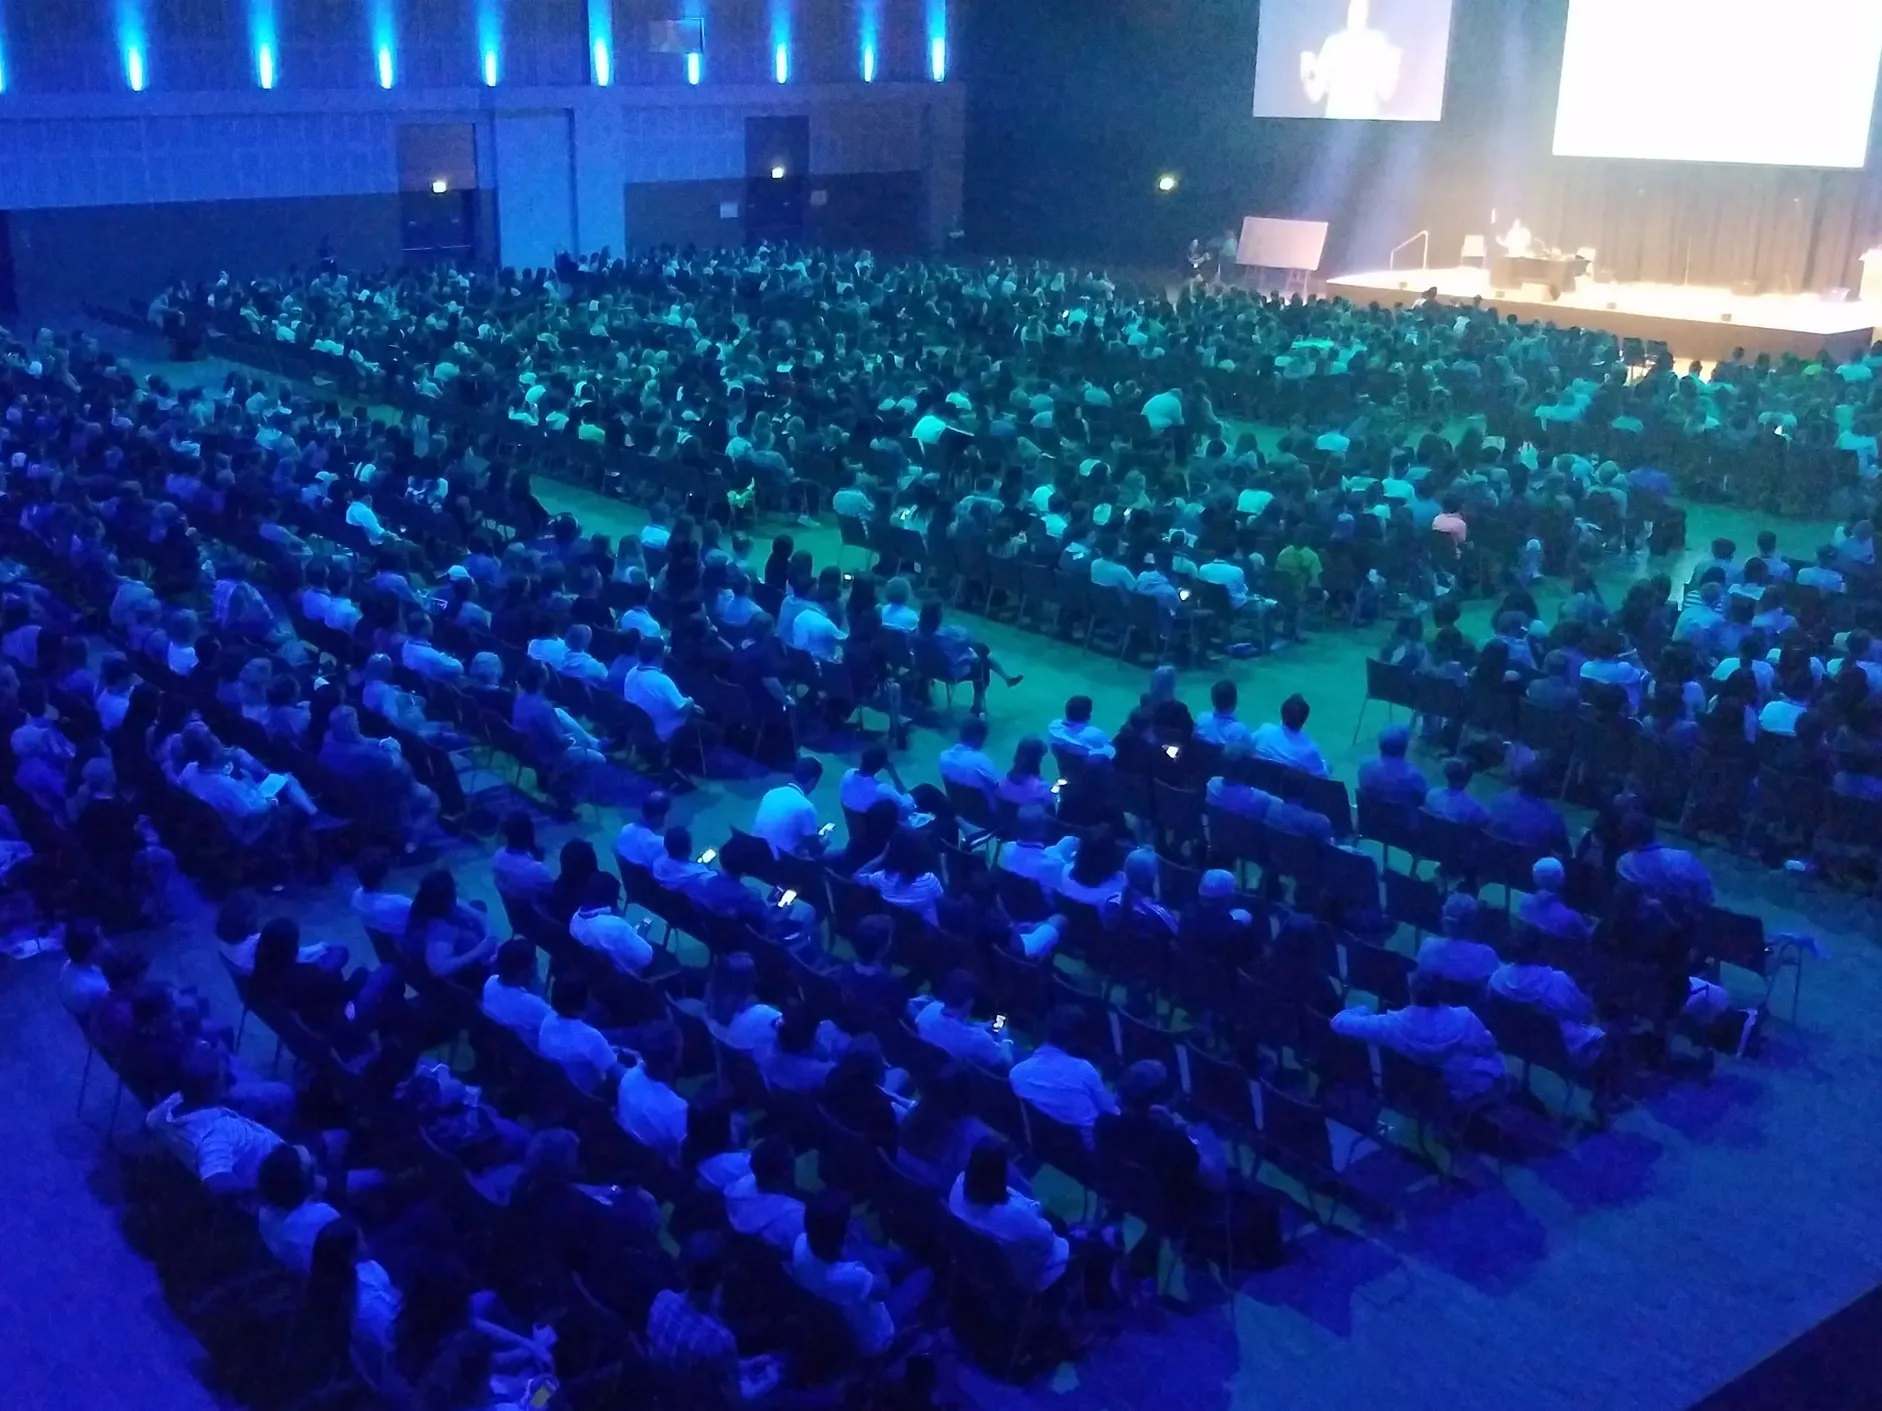 A large crowd of people sitting in the middle of an auditorium.